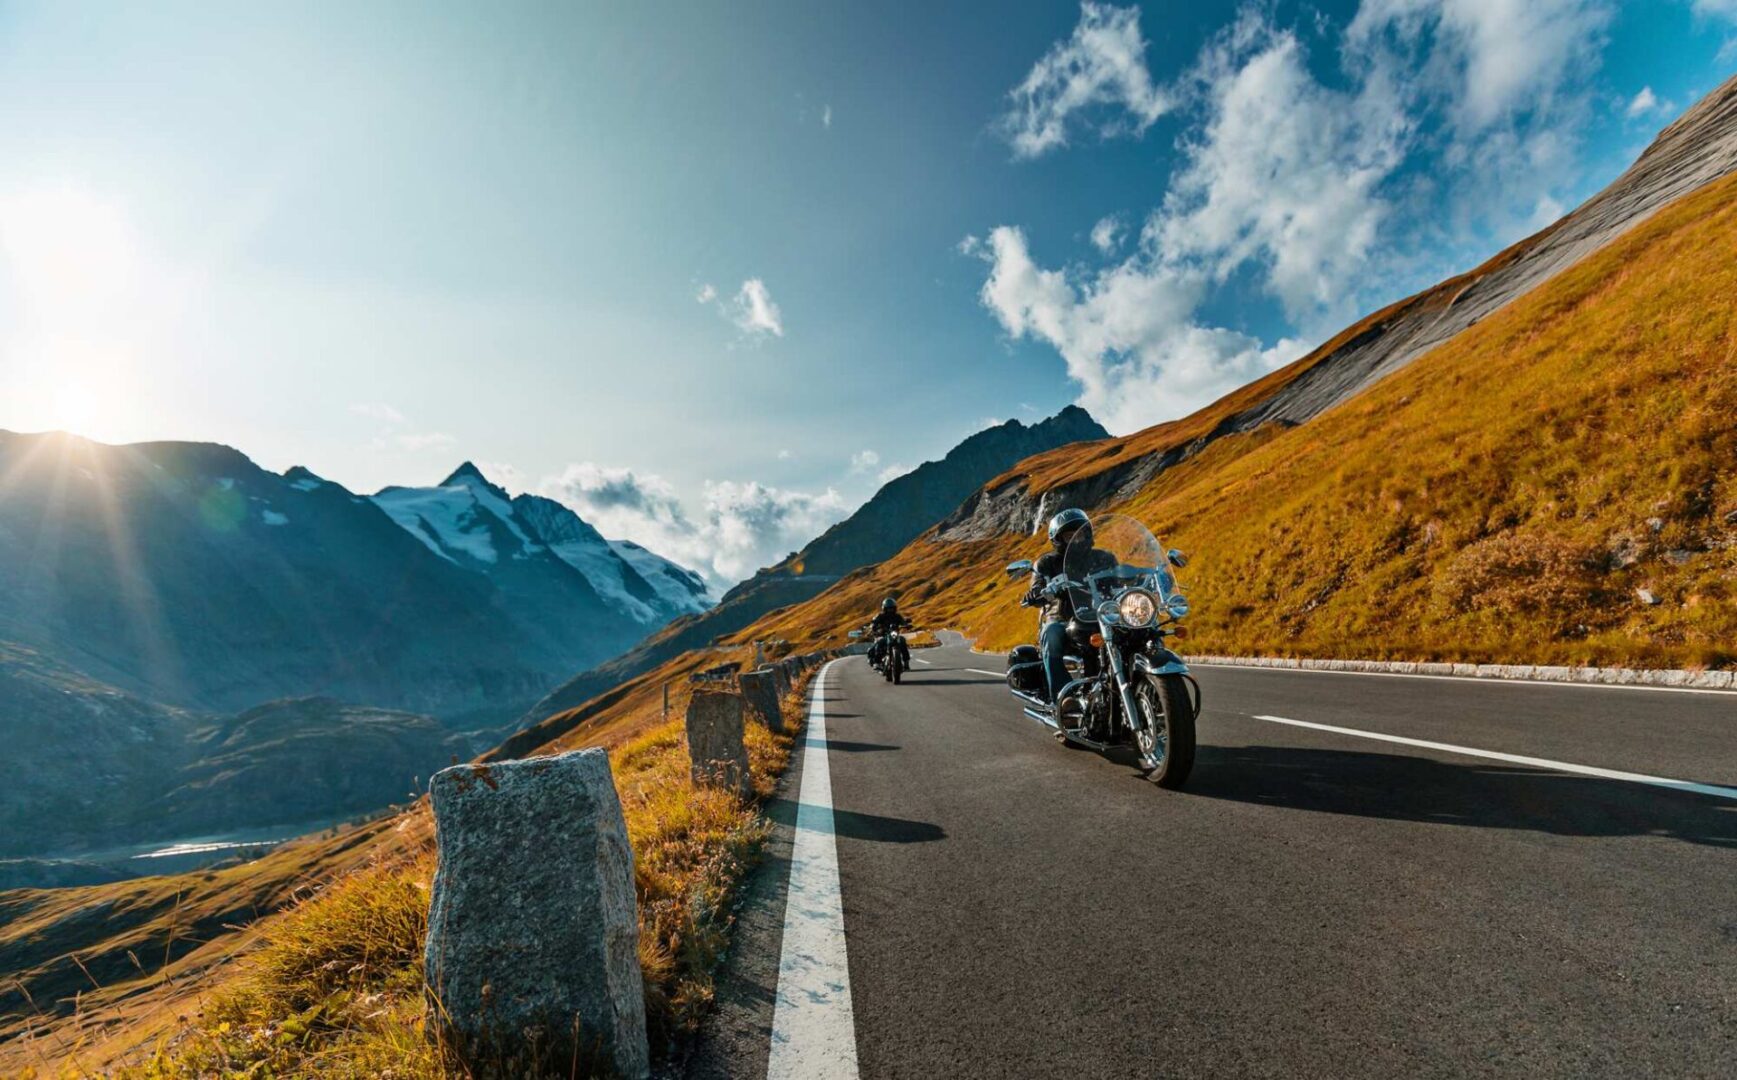 A beautiful view of the mountains with bikers